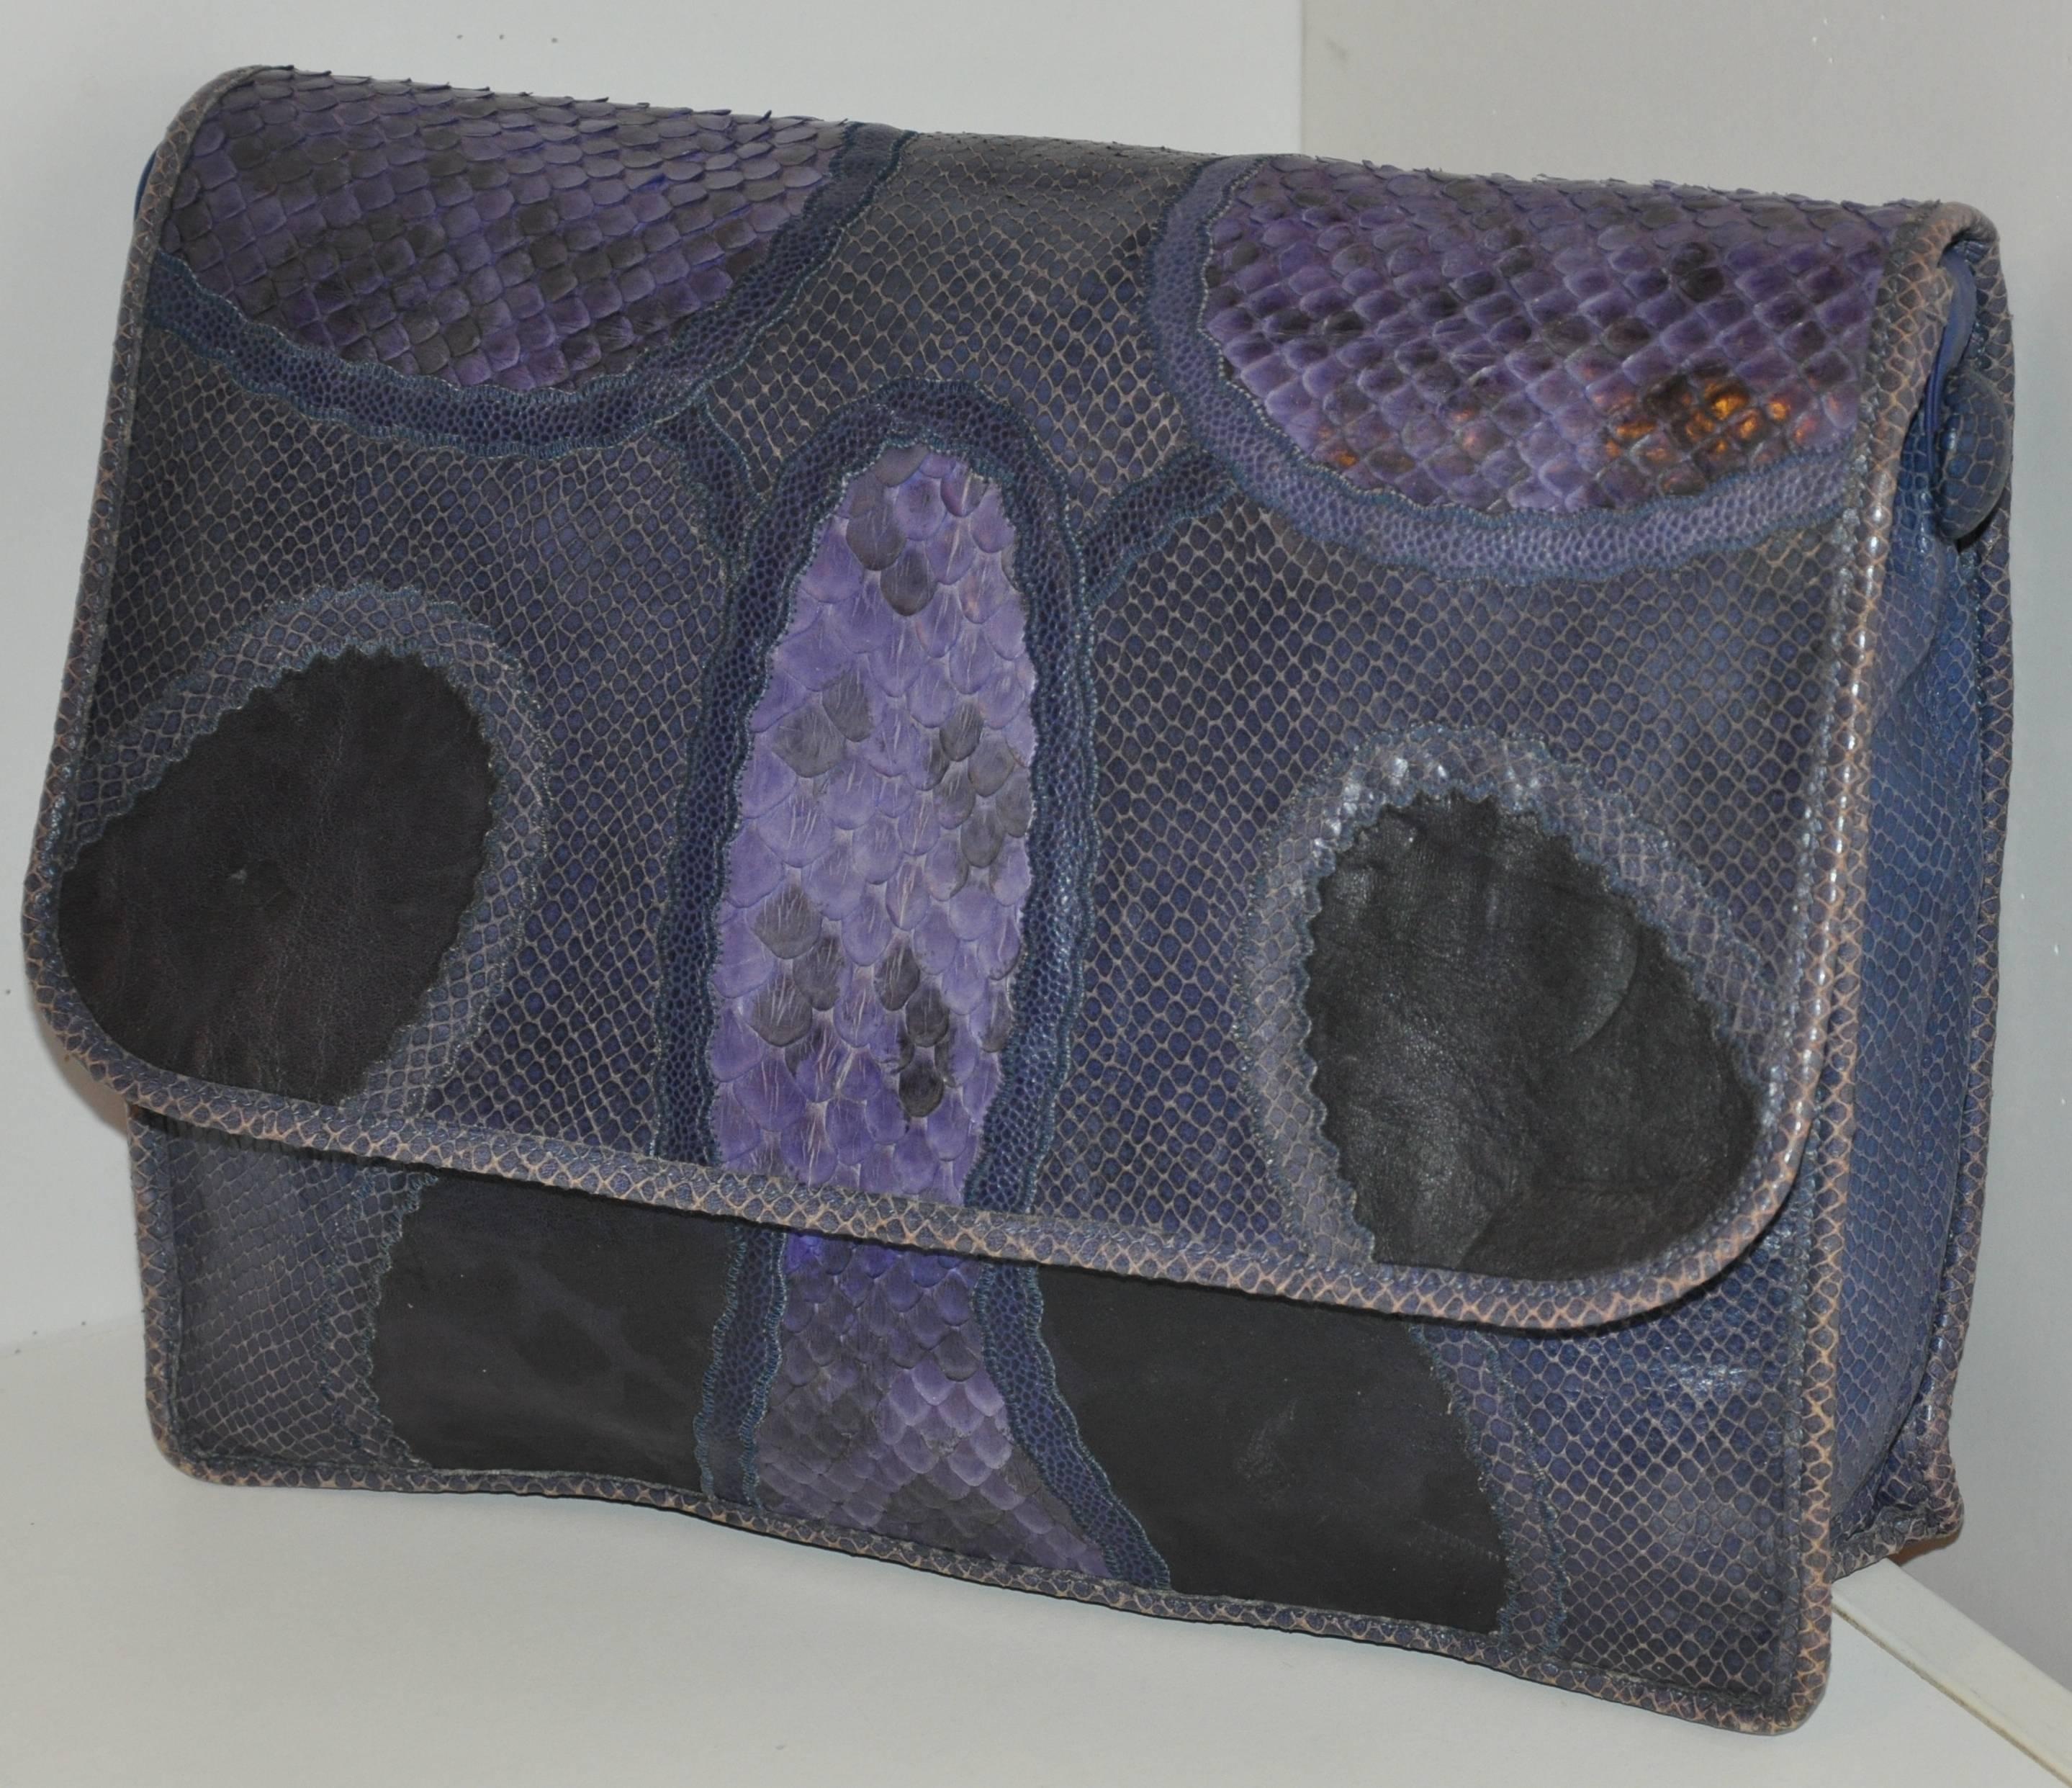         This wonderfully rare Carlos Falchi large shoulder bag with the option to wear use as a clutch is combined with multi-skins of snakeskin, lizard skin and pylon skins as well as textured calfskin. This wonderful shoulder bag in in